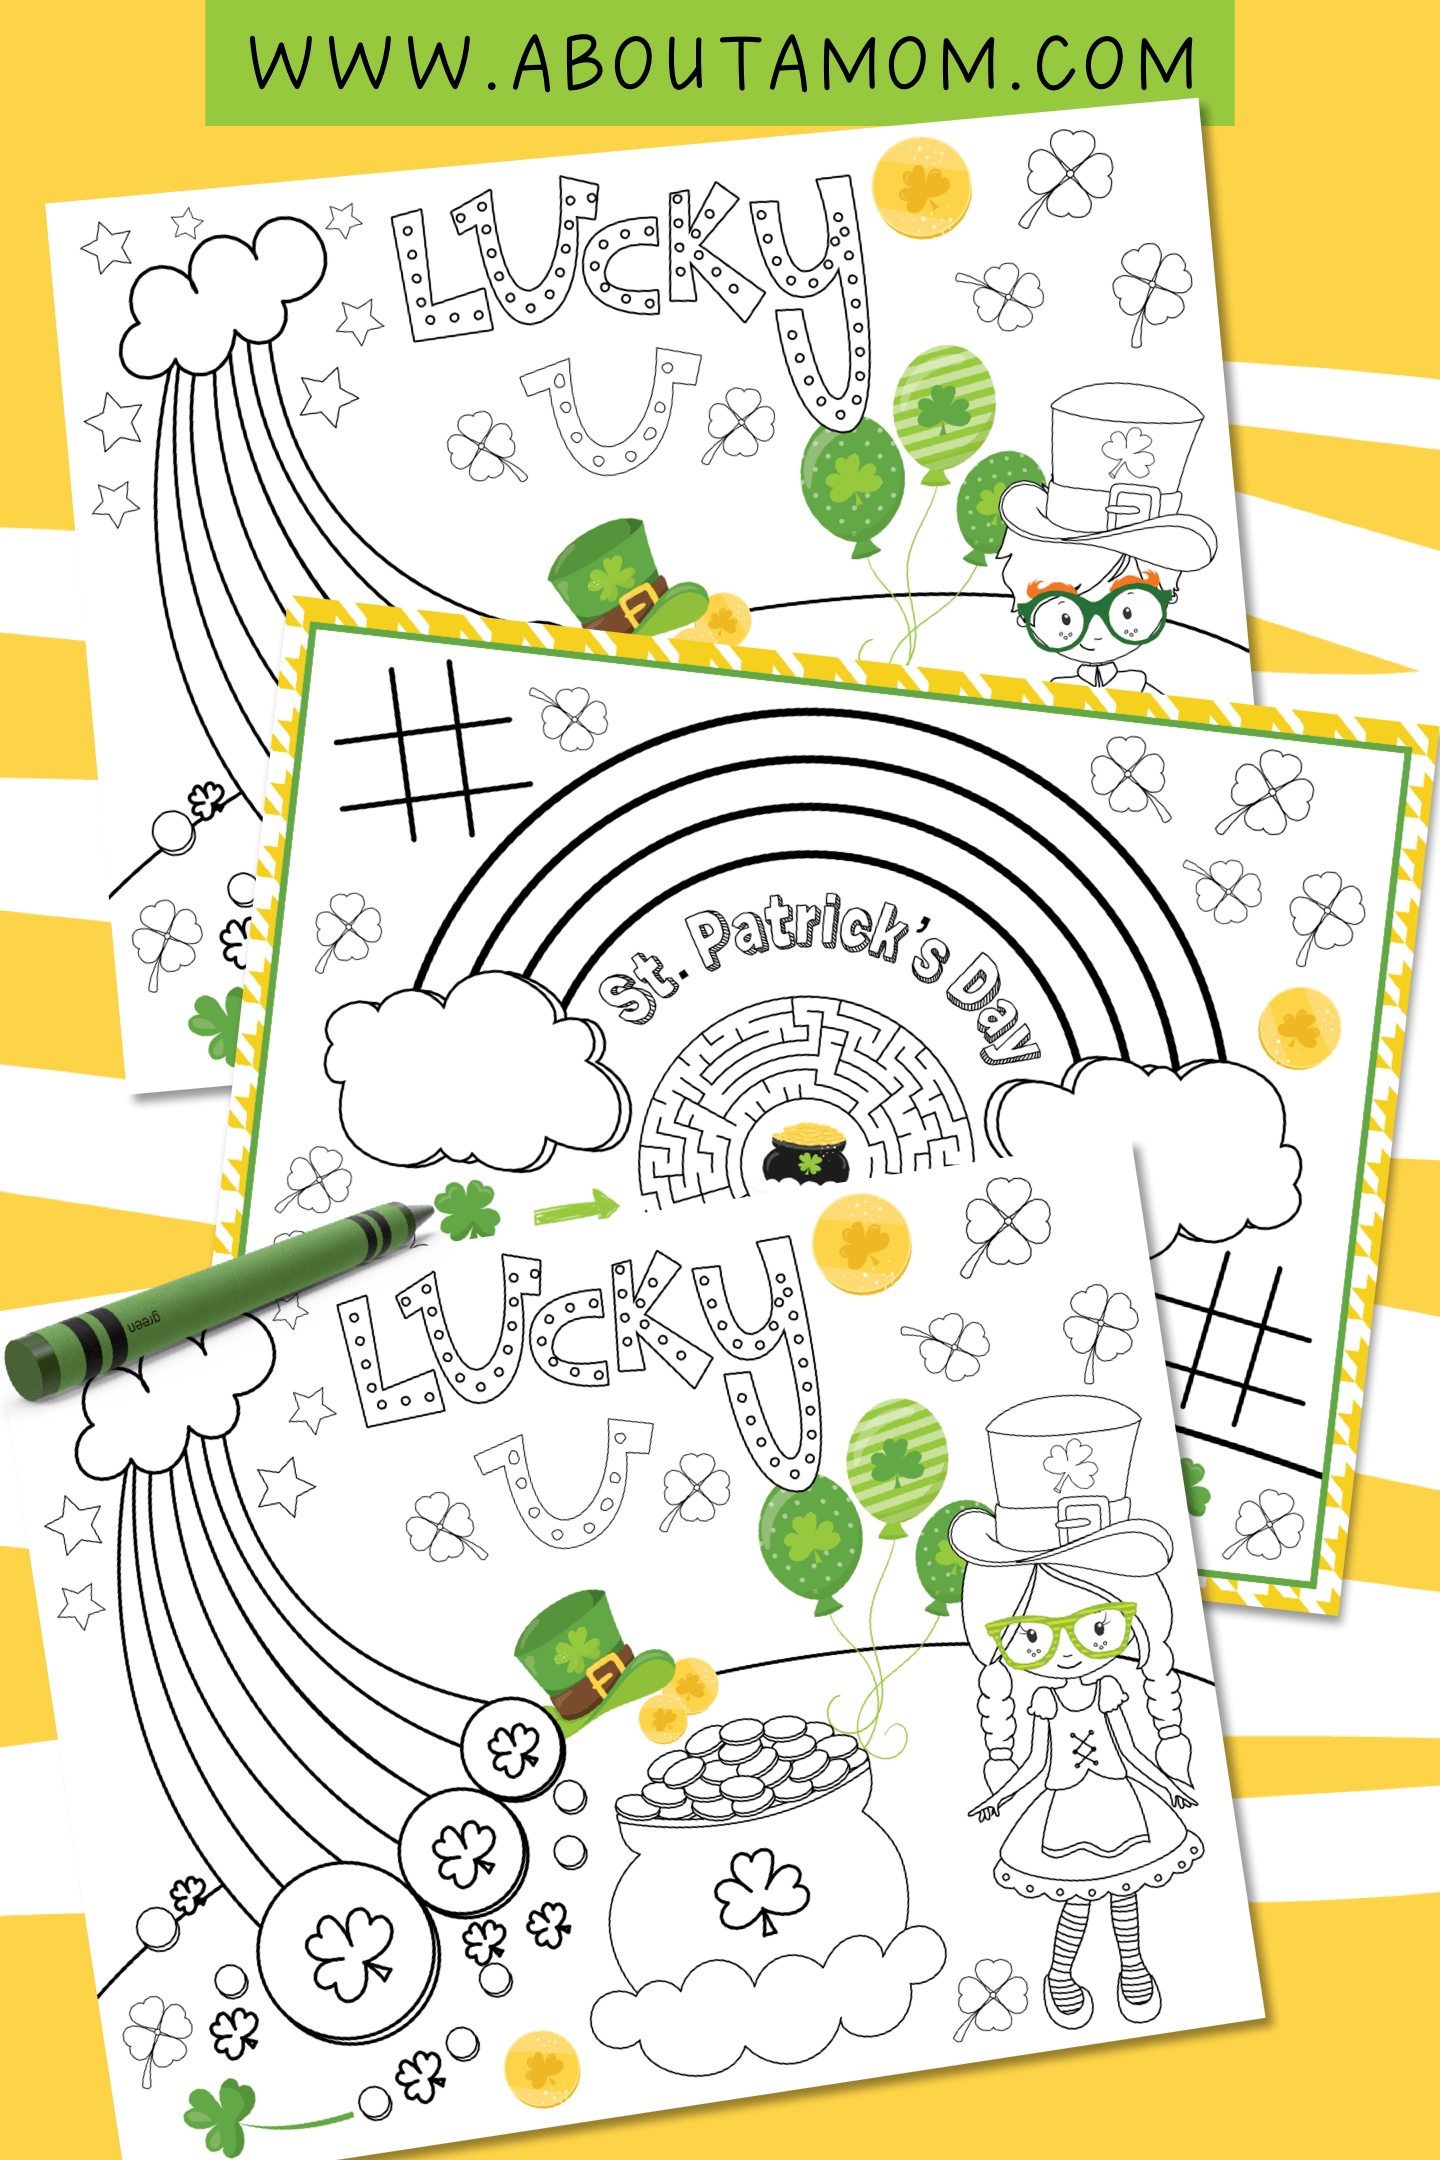 Are you looking for some fun St. Patrick's Day ideas for the kids? This free St Patrick’s Day Printable Activity Pack is an easy, fun way to keep kids of all ages entertained during St. Patrick’s Day classroom parties, family dinners, and neighborhood parties. 